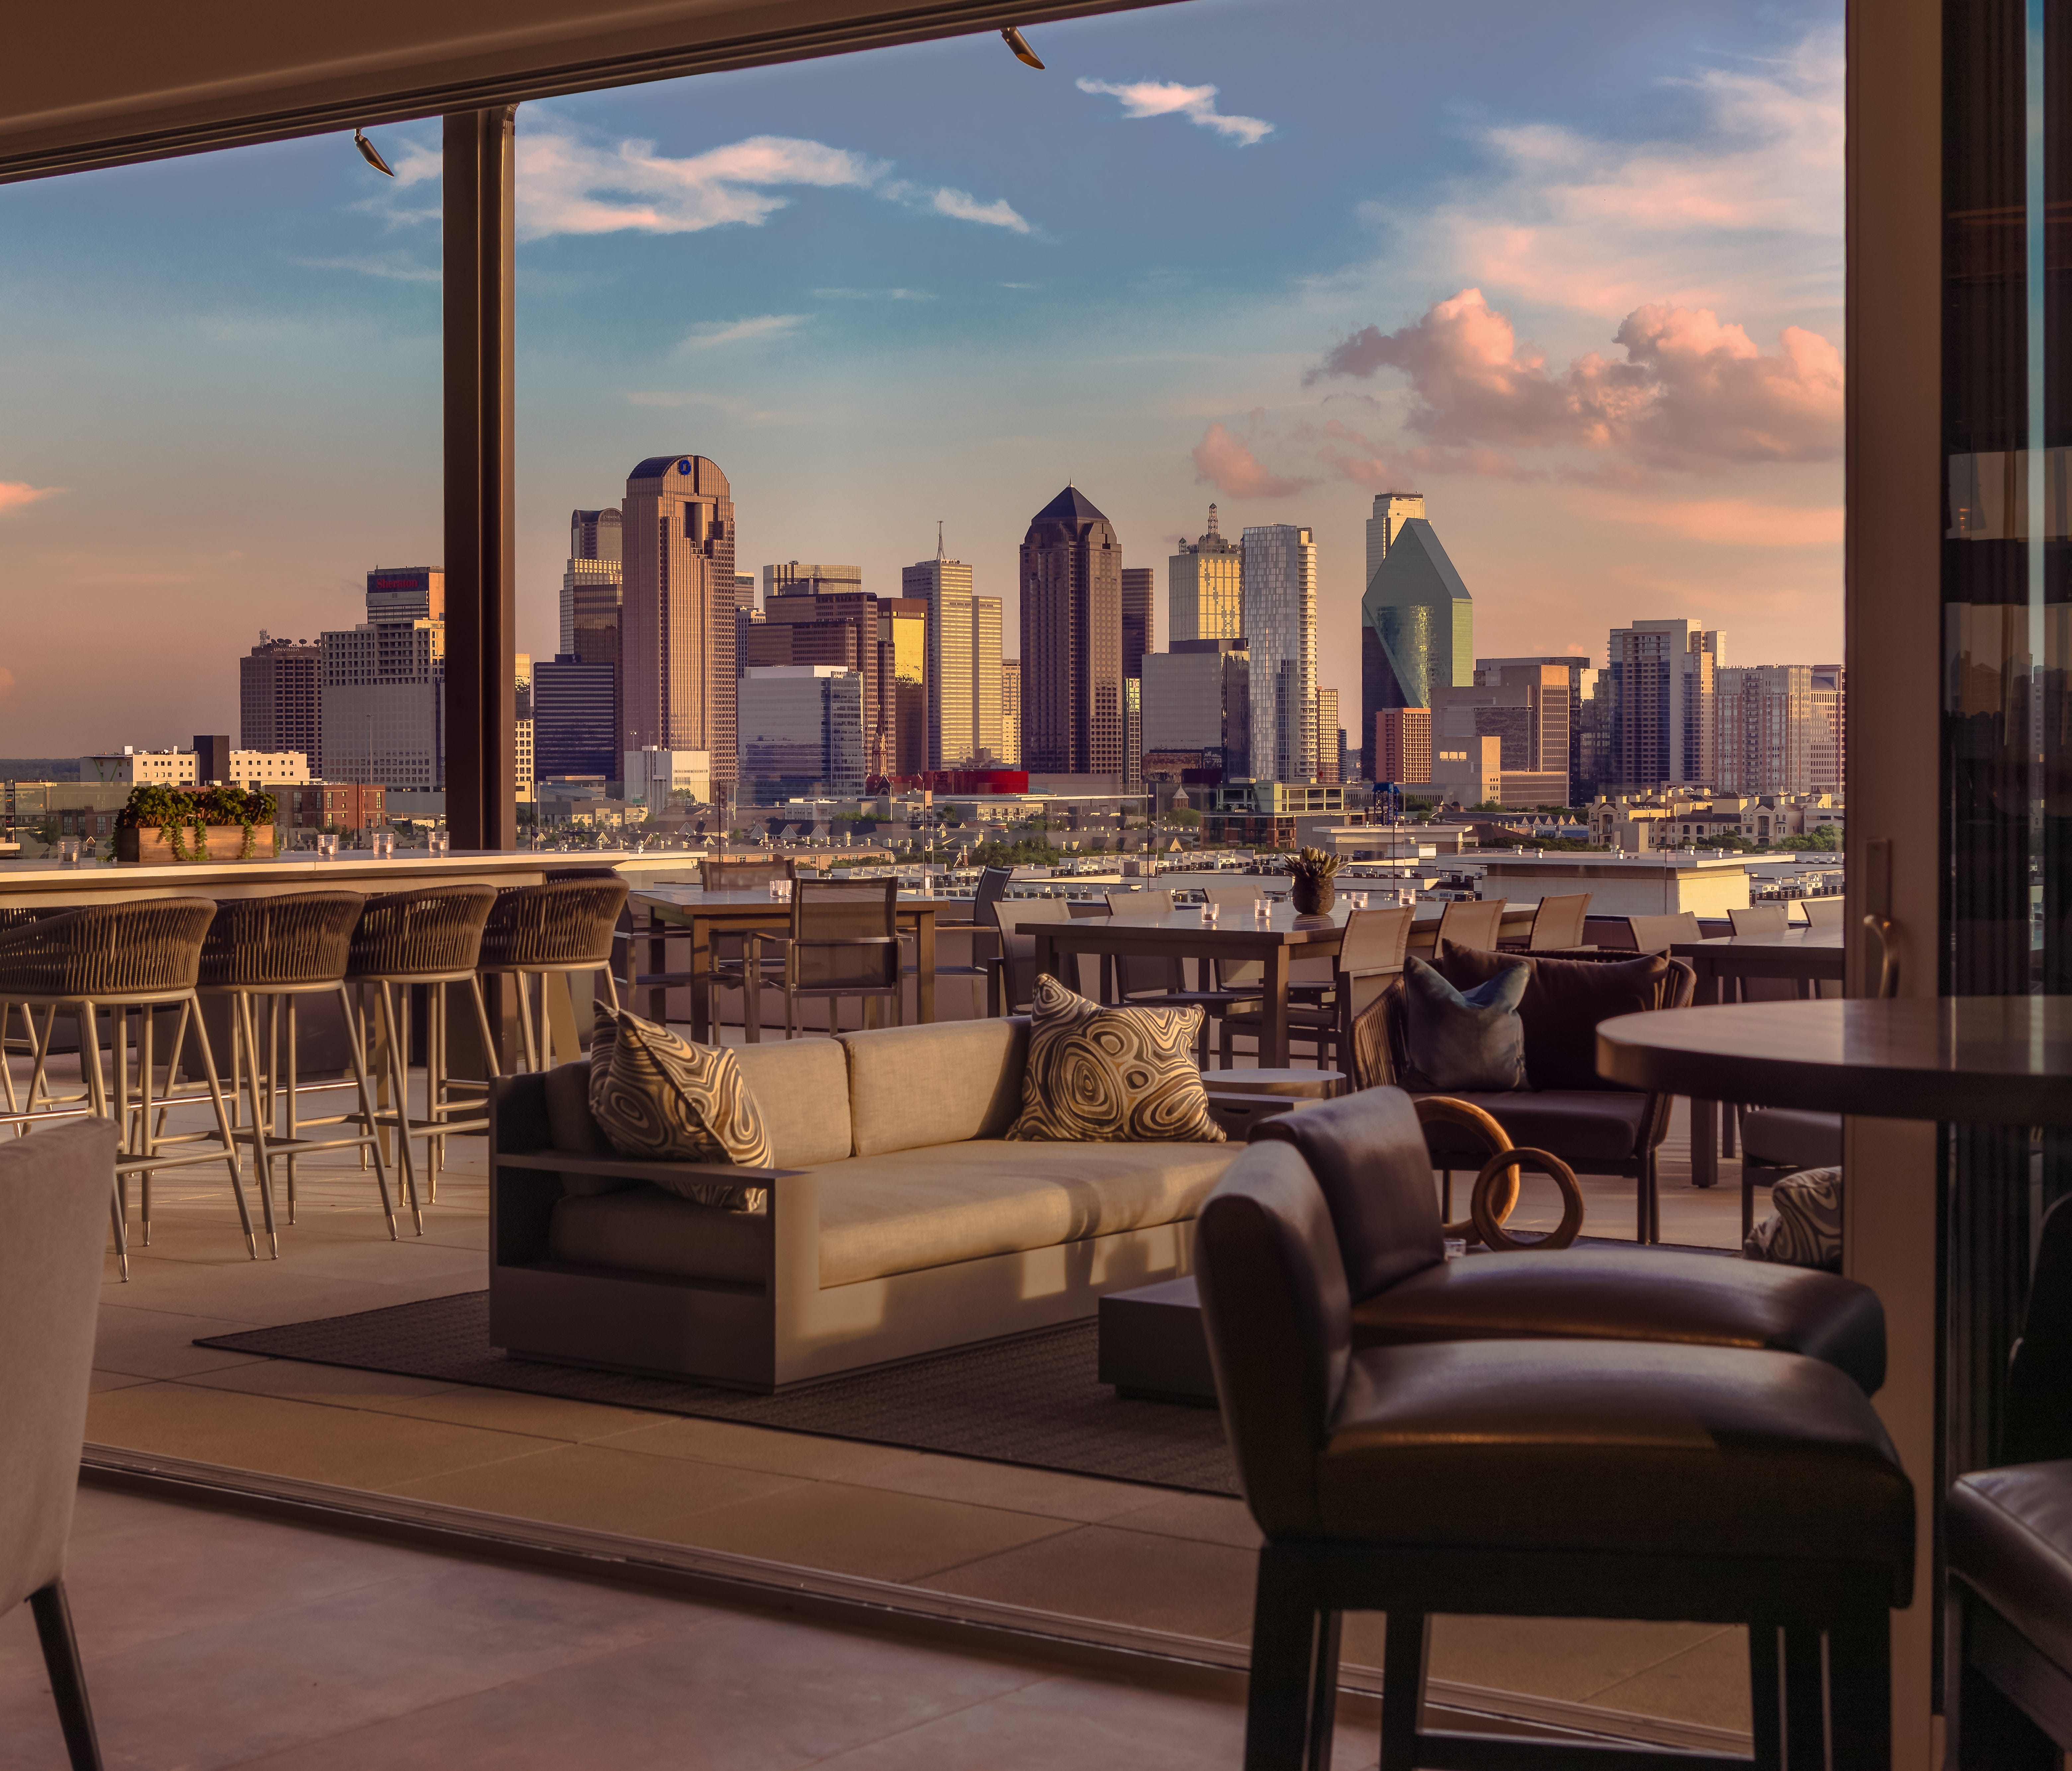 Canopy by Hilton Dallas Uptown has a new rooftop bar with panoramic views of the city. It's called Upside West Village.